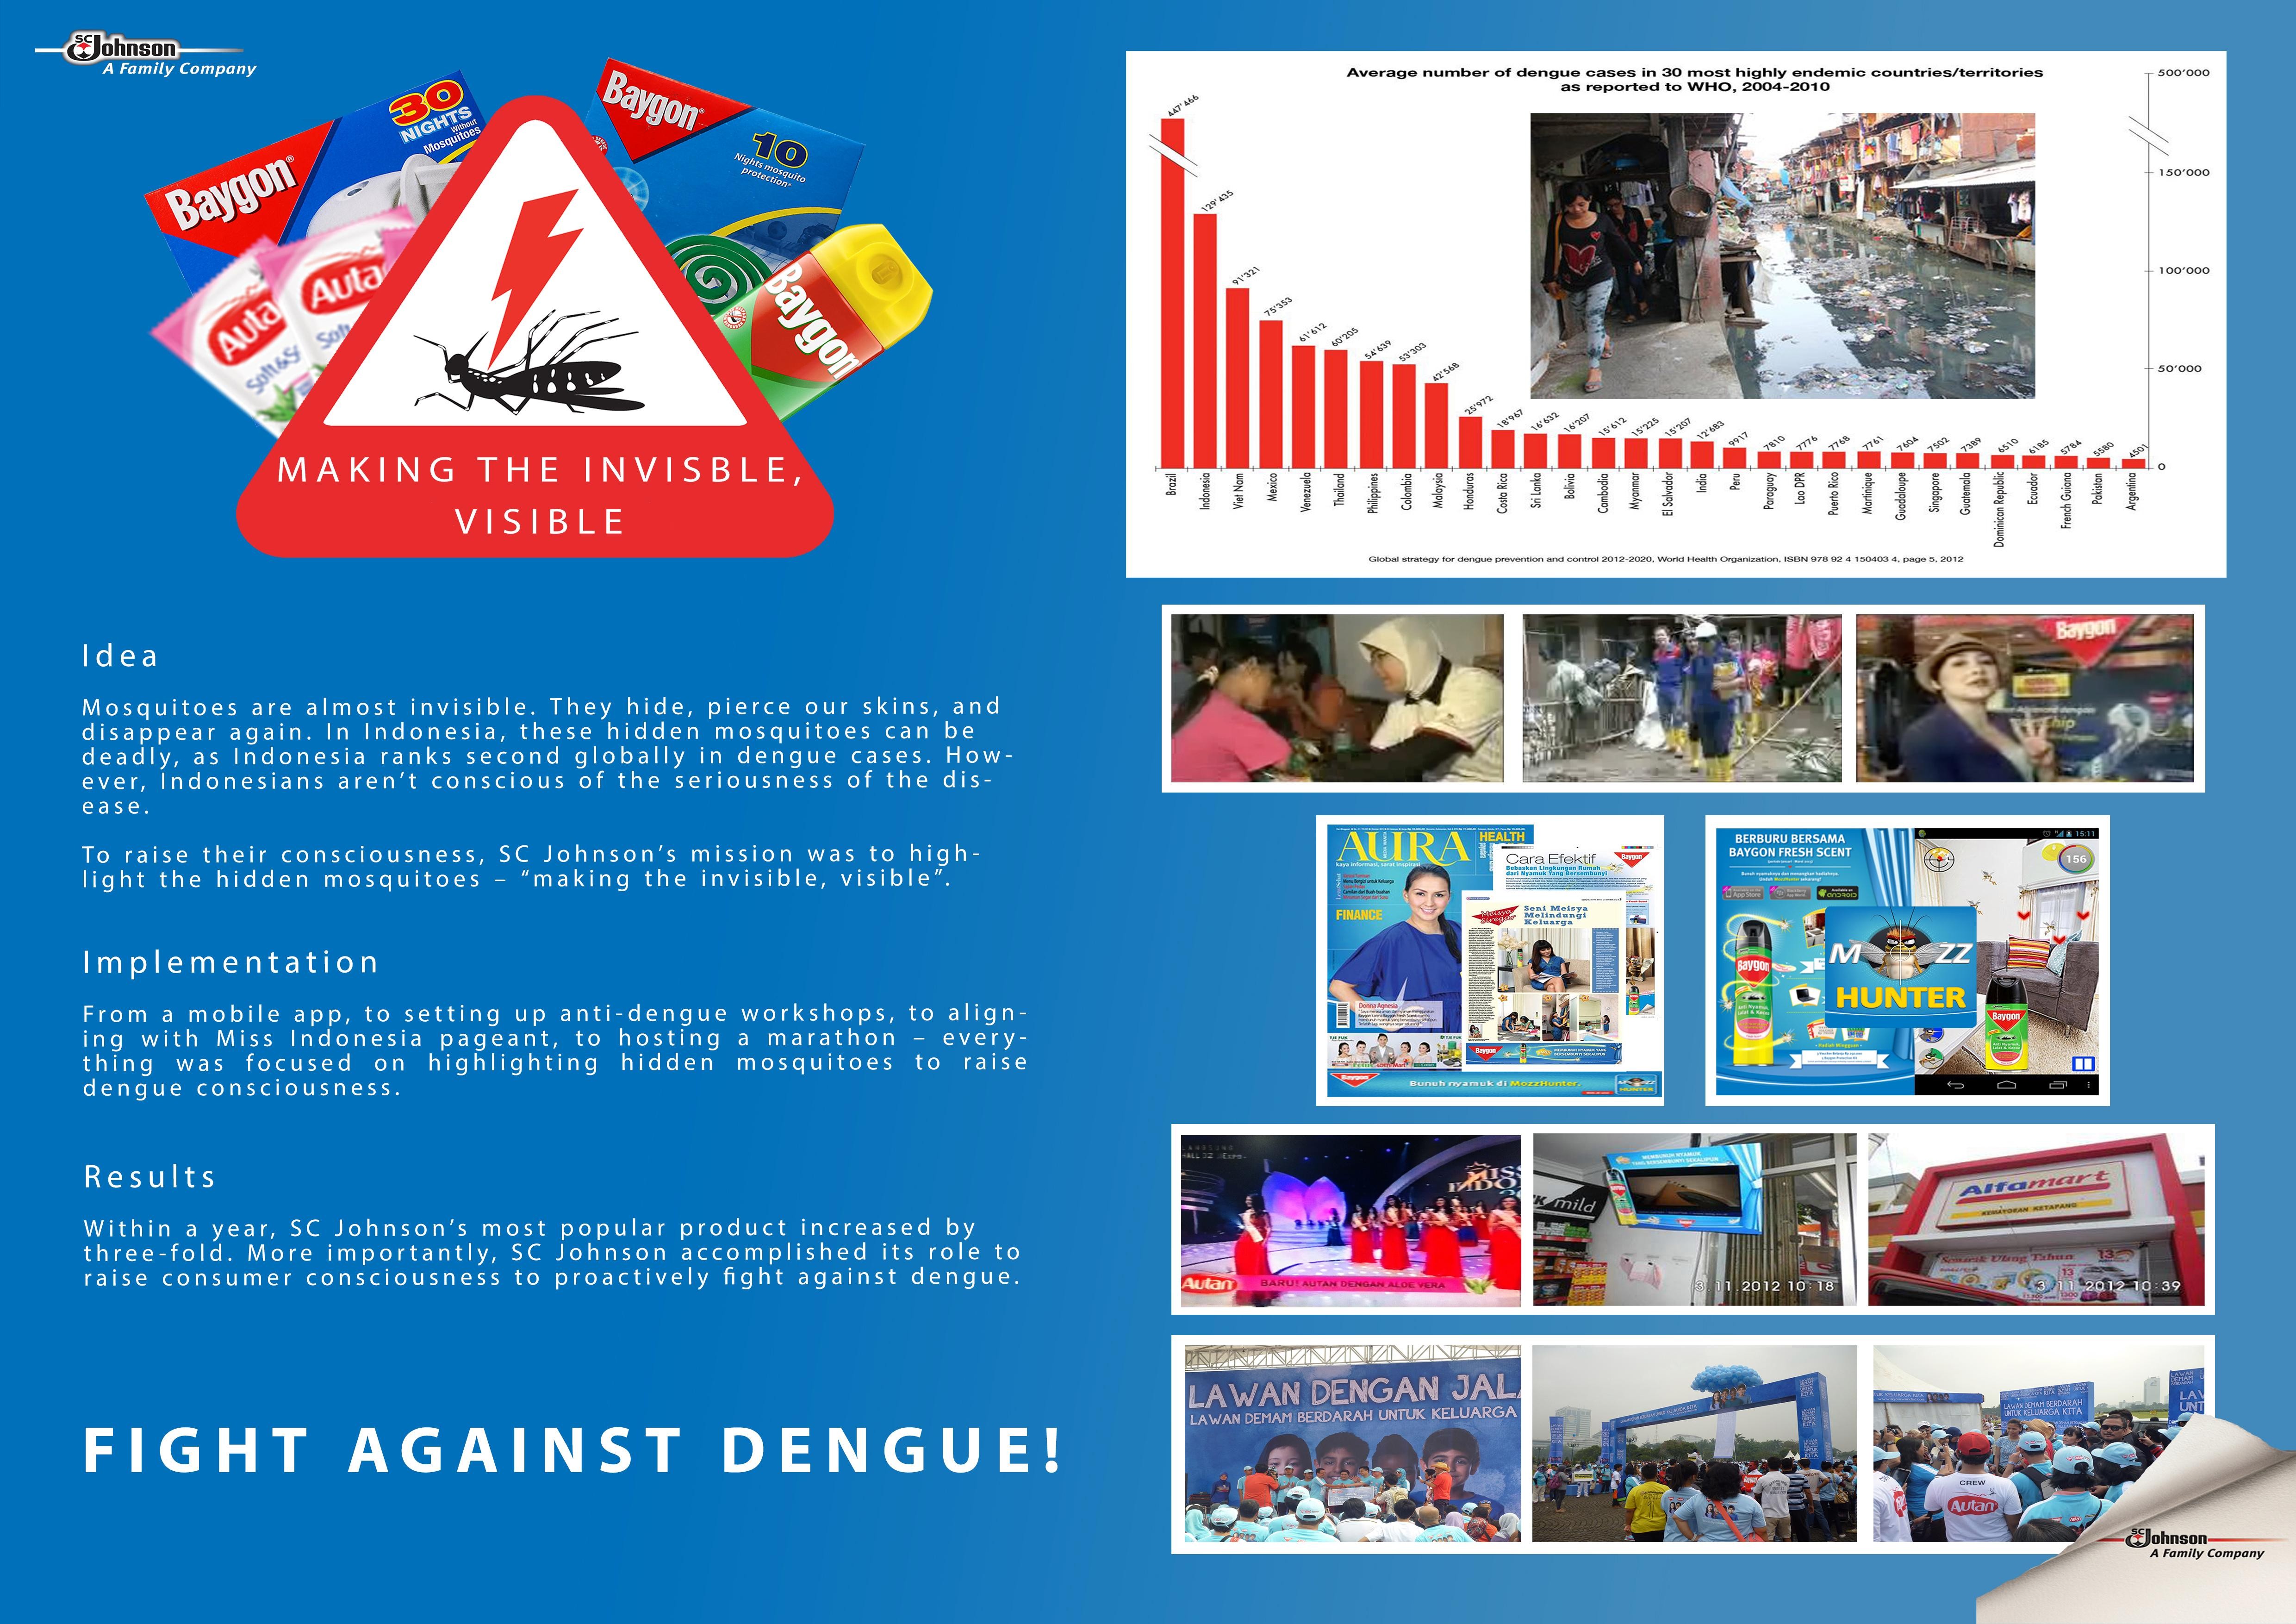 MAKING THE INVISIBLE, VISIBLE: FIGHT AGAINST DENGUE